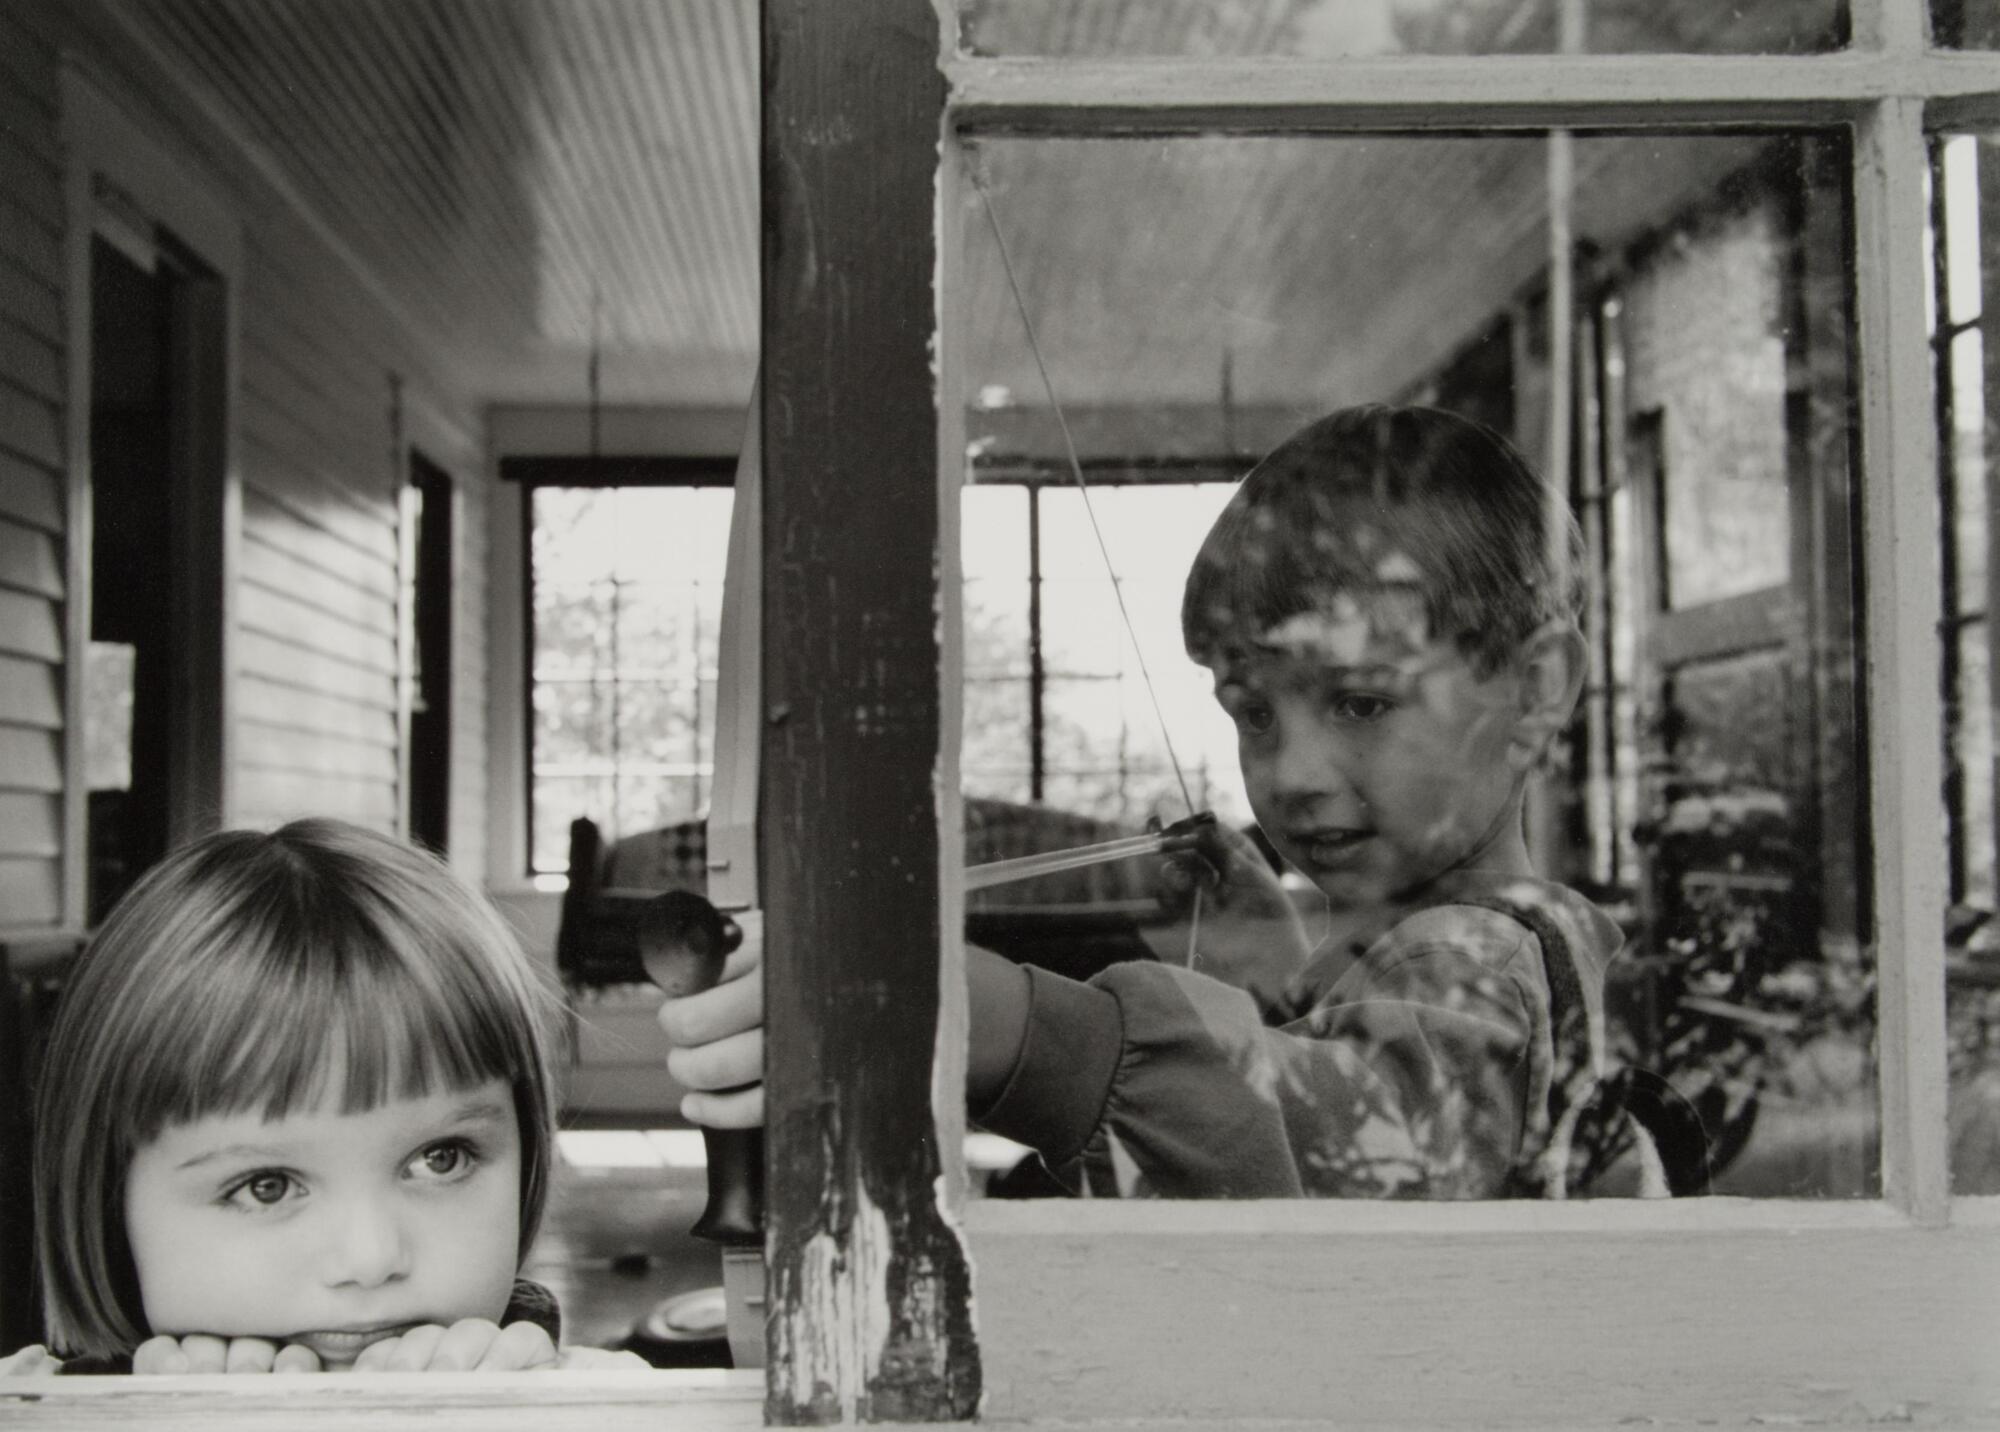 This photograph is of two children in an enclosed porch. A young girl rests her head on a ledge, while a young boy stands behind her to the right, holding a toy bow and arrow close to her head.